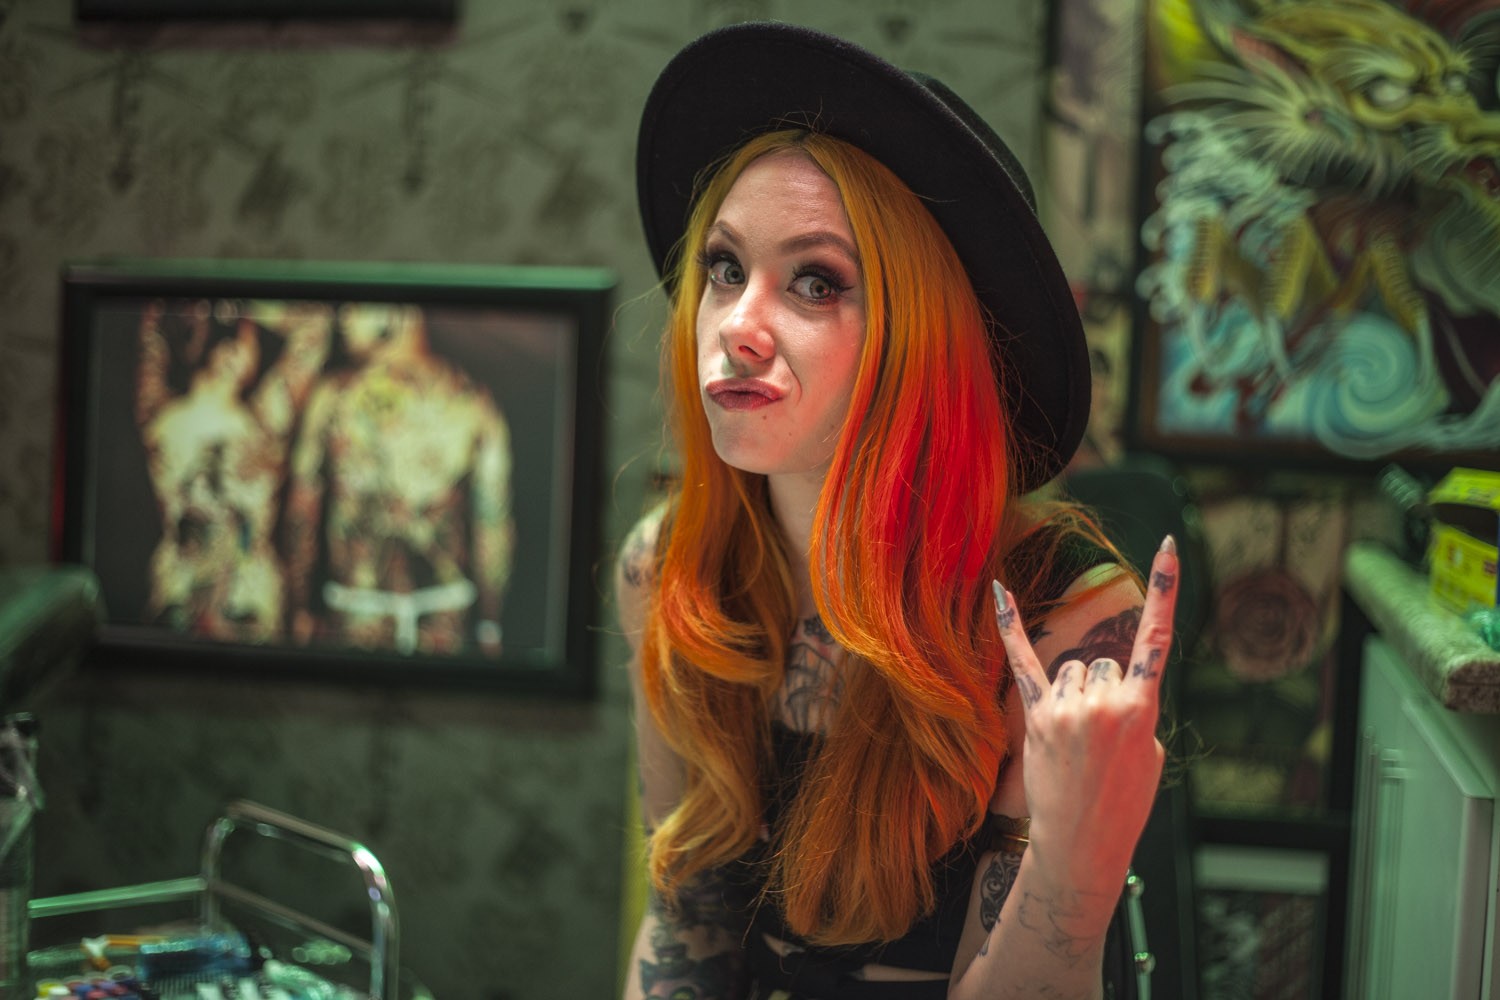 Tattoo Redhead Long Nails Metal Horns Hand Gesture Black Hat Women With Hats Alternative Subculture  1500x1000